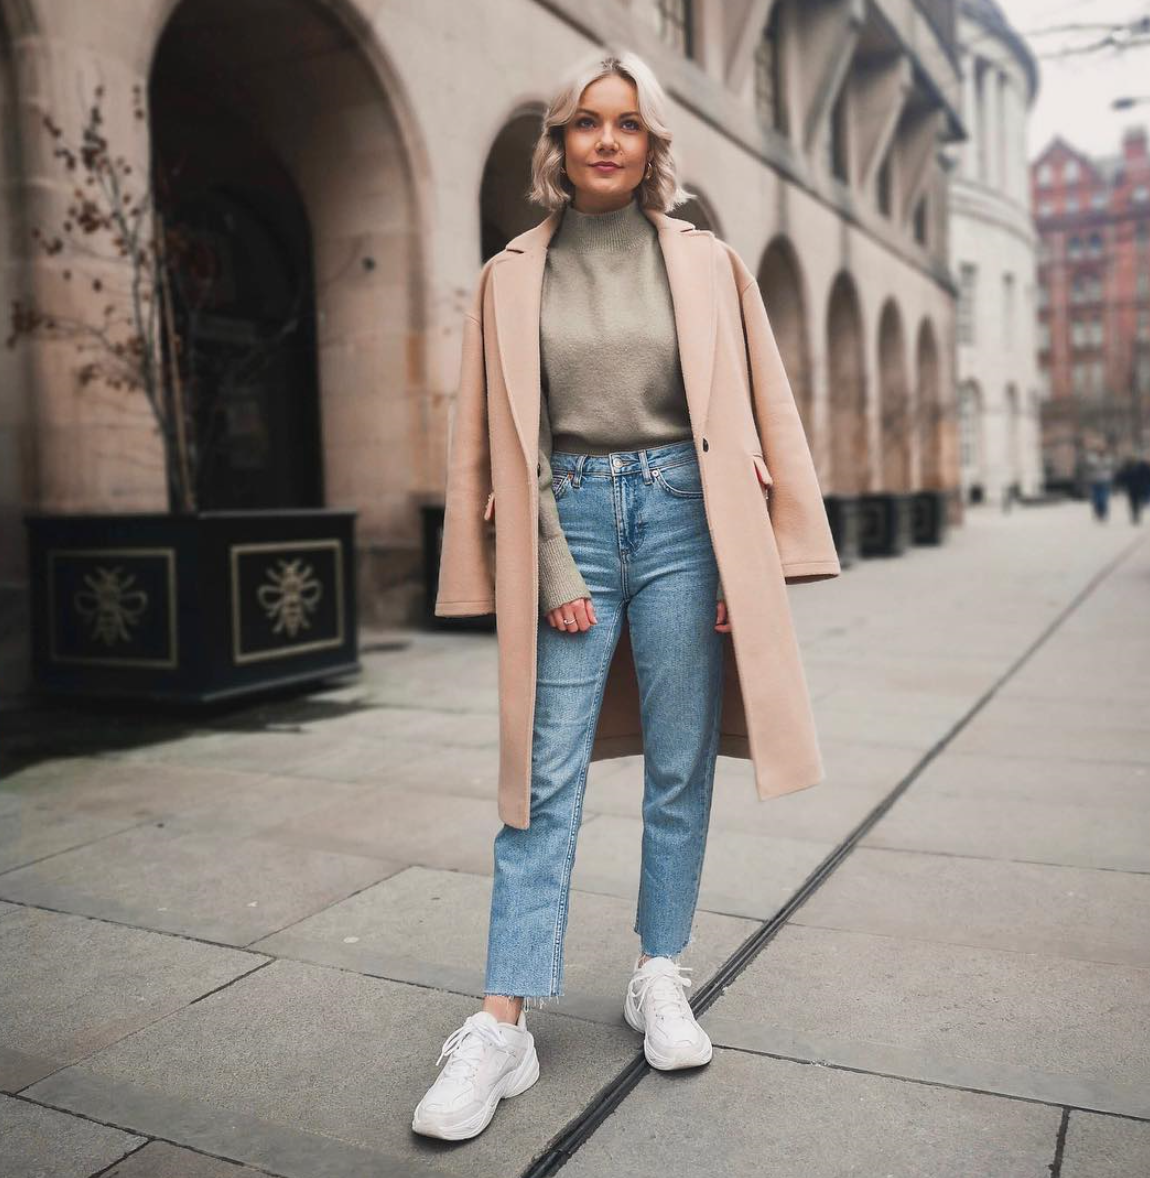 Instagram Inspiration for Your Fall Outerwear - Crossroads